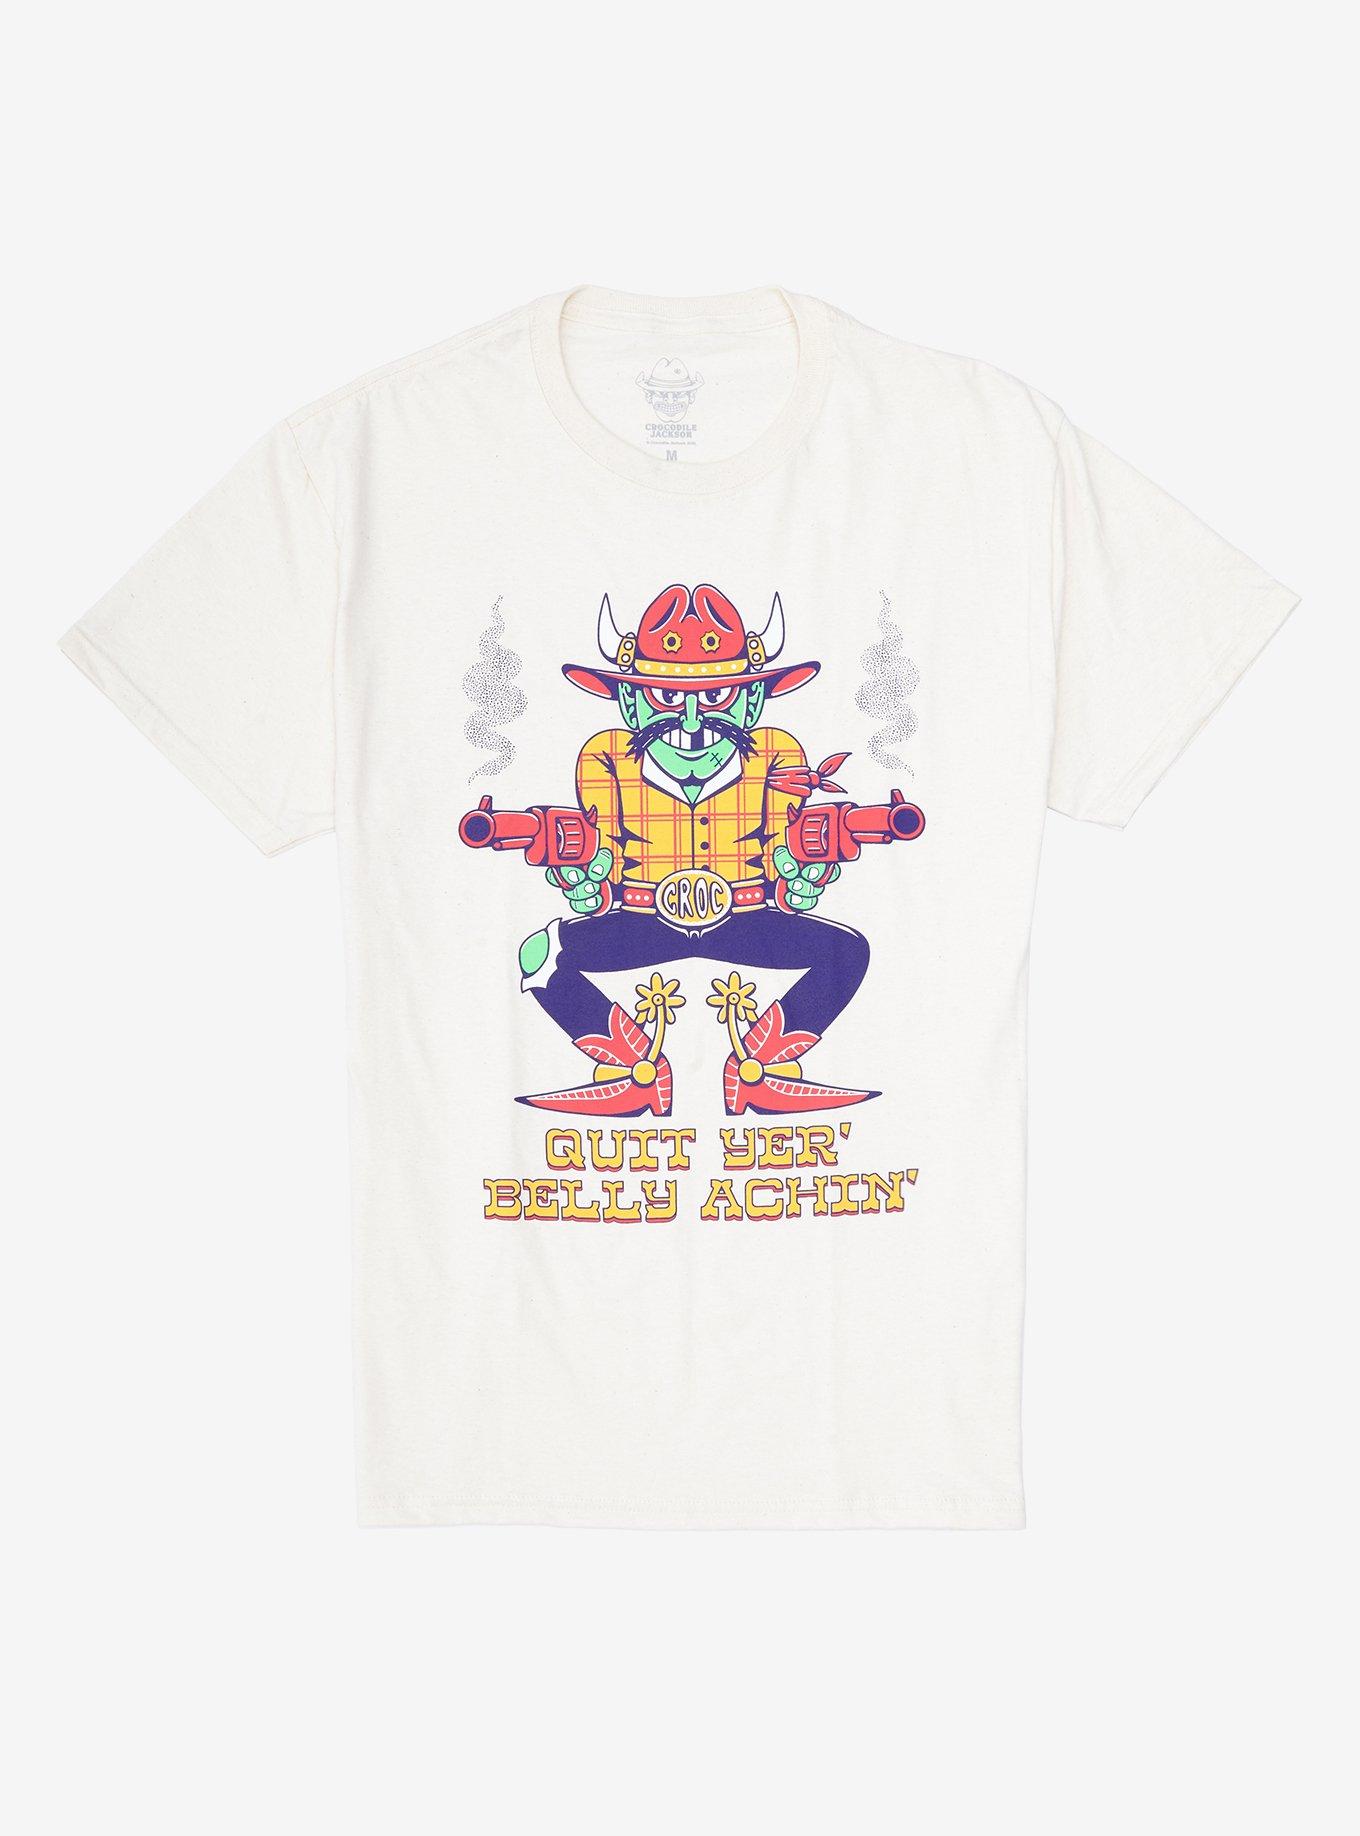 Quit Yer' Belly Achin' T-Shirt By Crocodile Jackson | Hot Topic